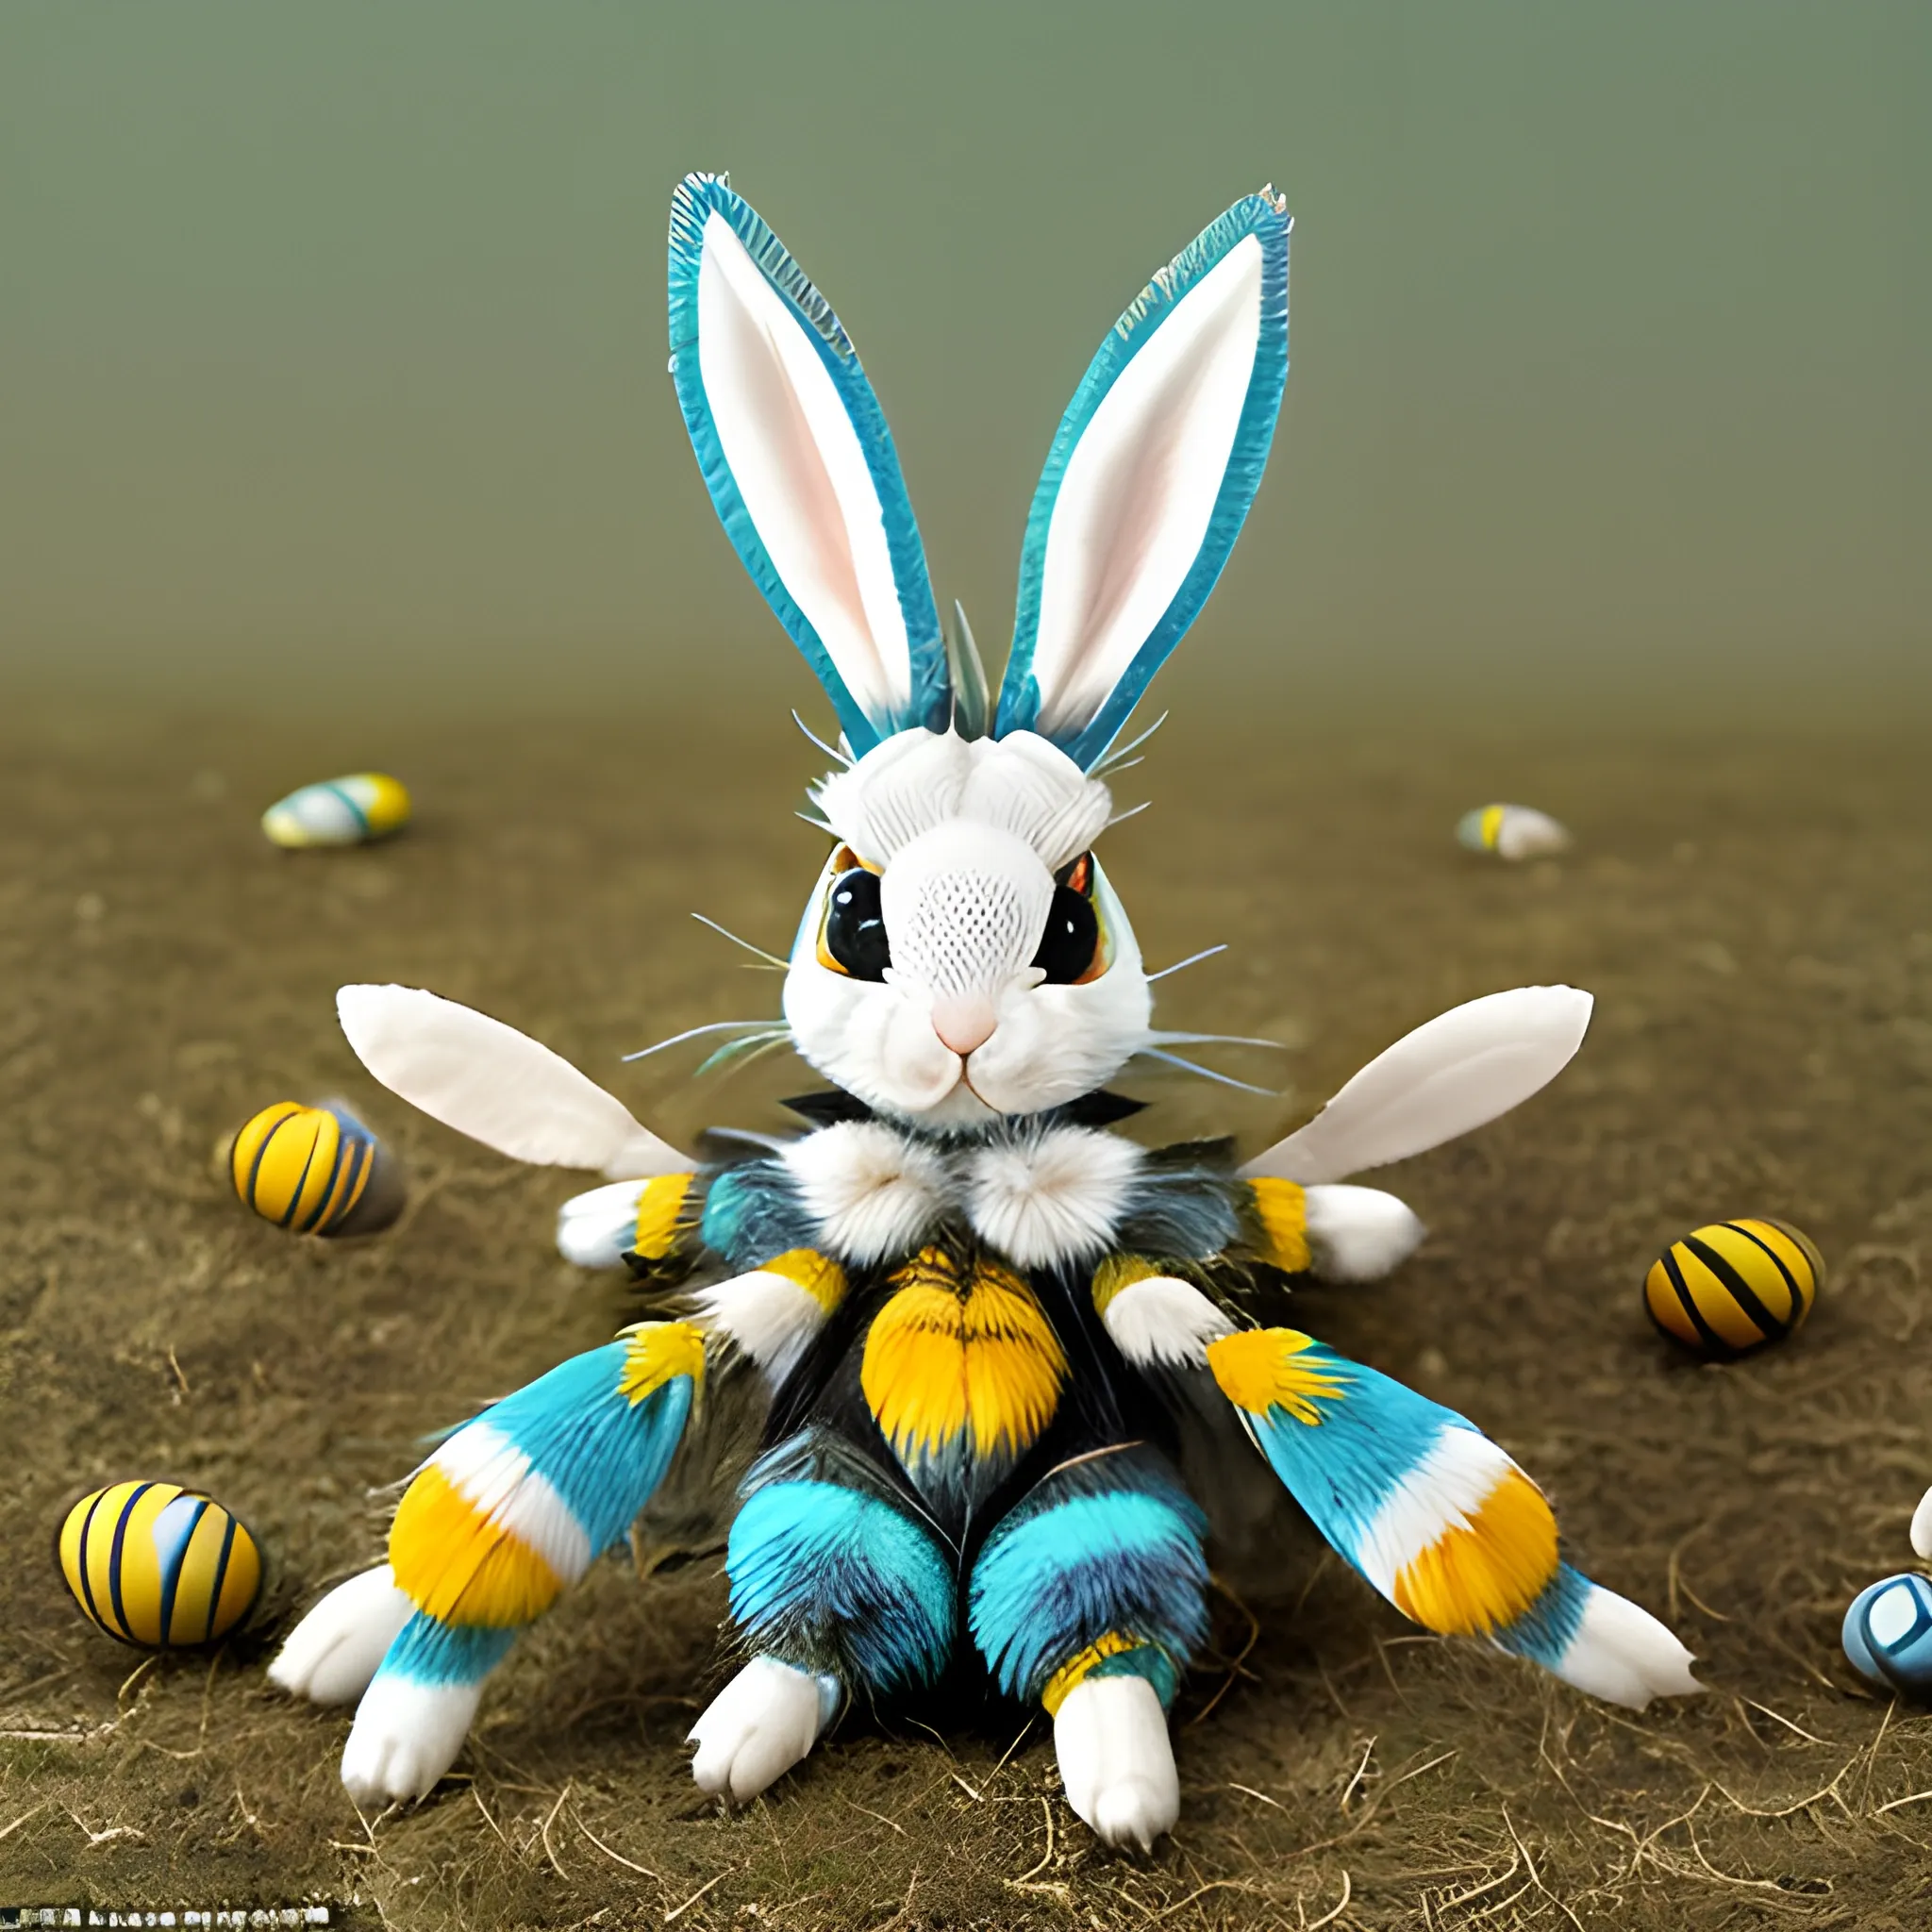 Insectile furry fluffy lapine hybrid of rabbit and bumblebee, with blue and green and white stripes, with bunny ears and butterfly wings, with predatory mandibles and segmented body and six jointed legs with tube feet, with brightly coloured eggs, on rough scrubland, at night, very detailed, Trippy